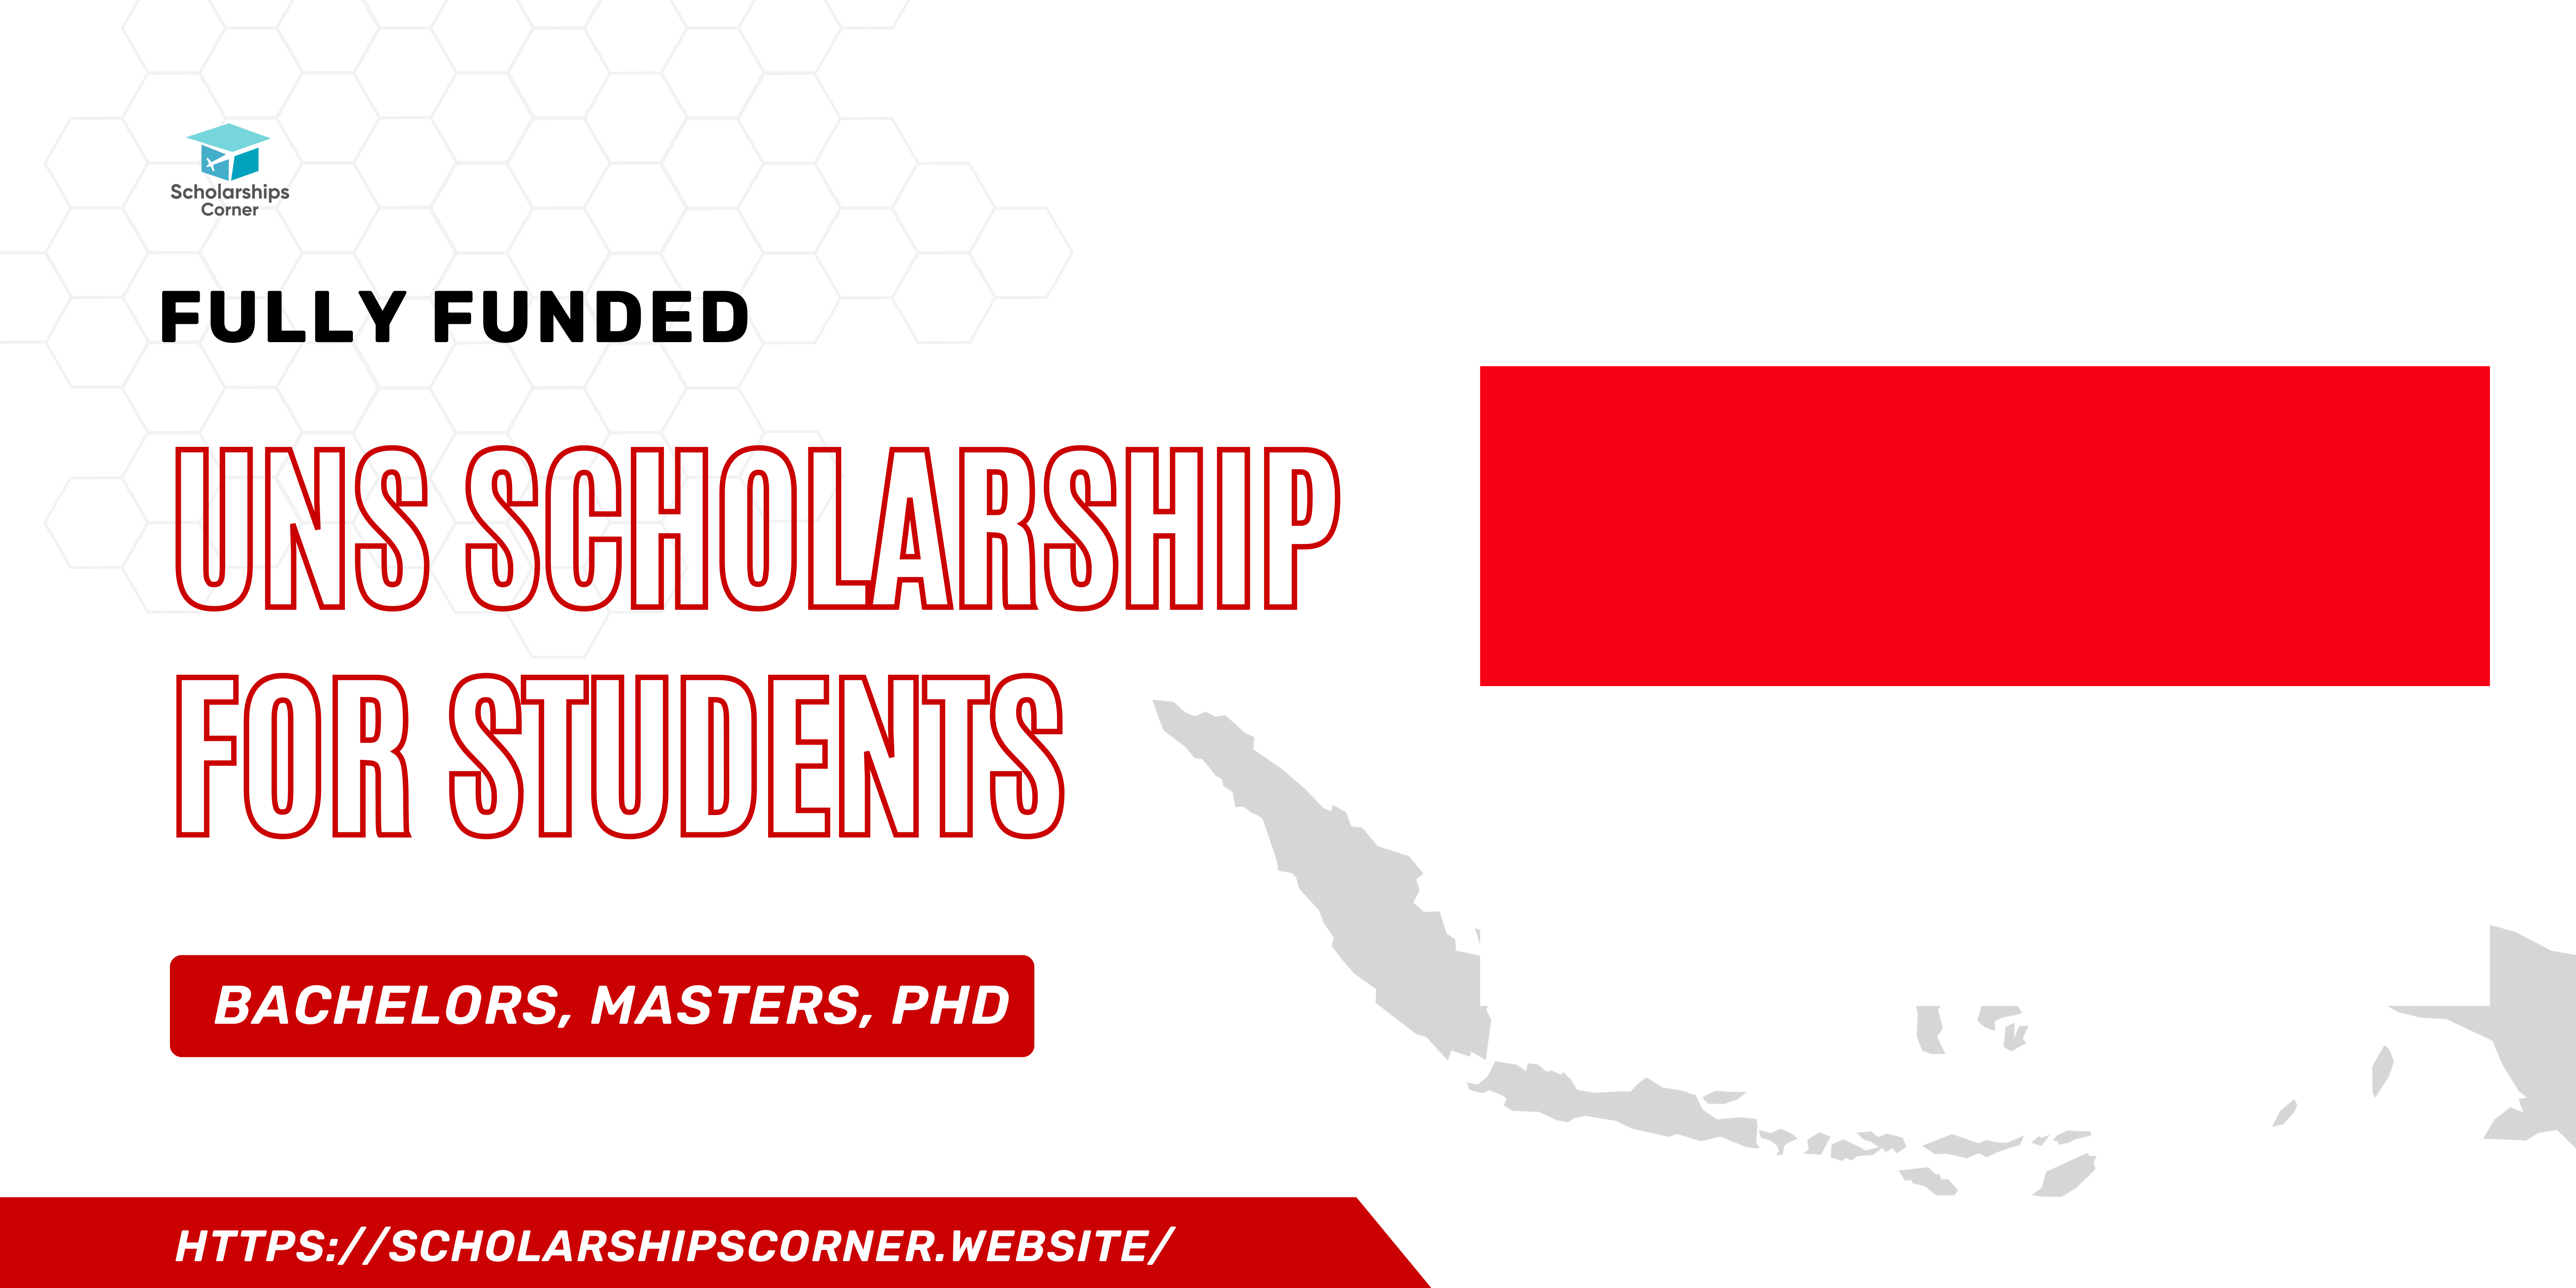 UNS Scholarship for Students, fully funded scholarships